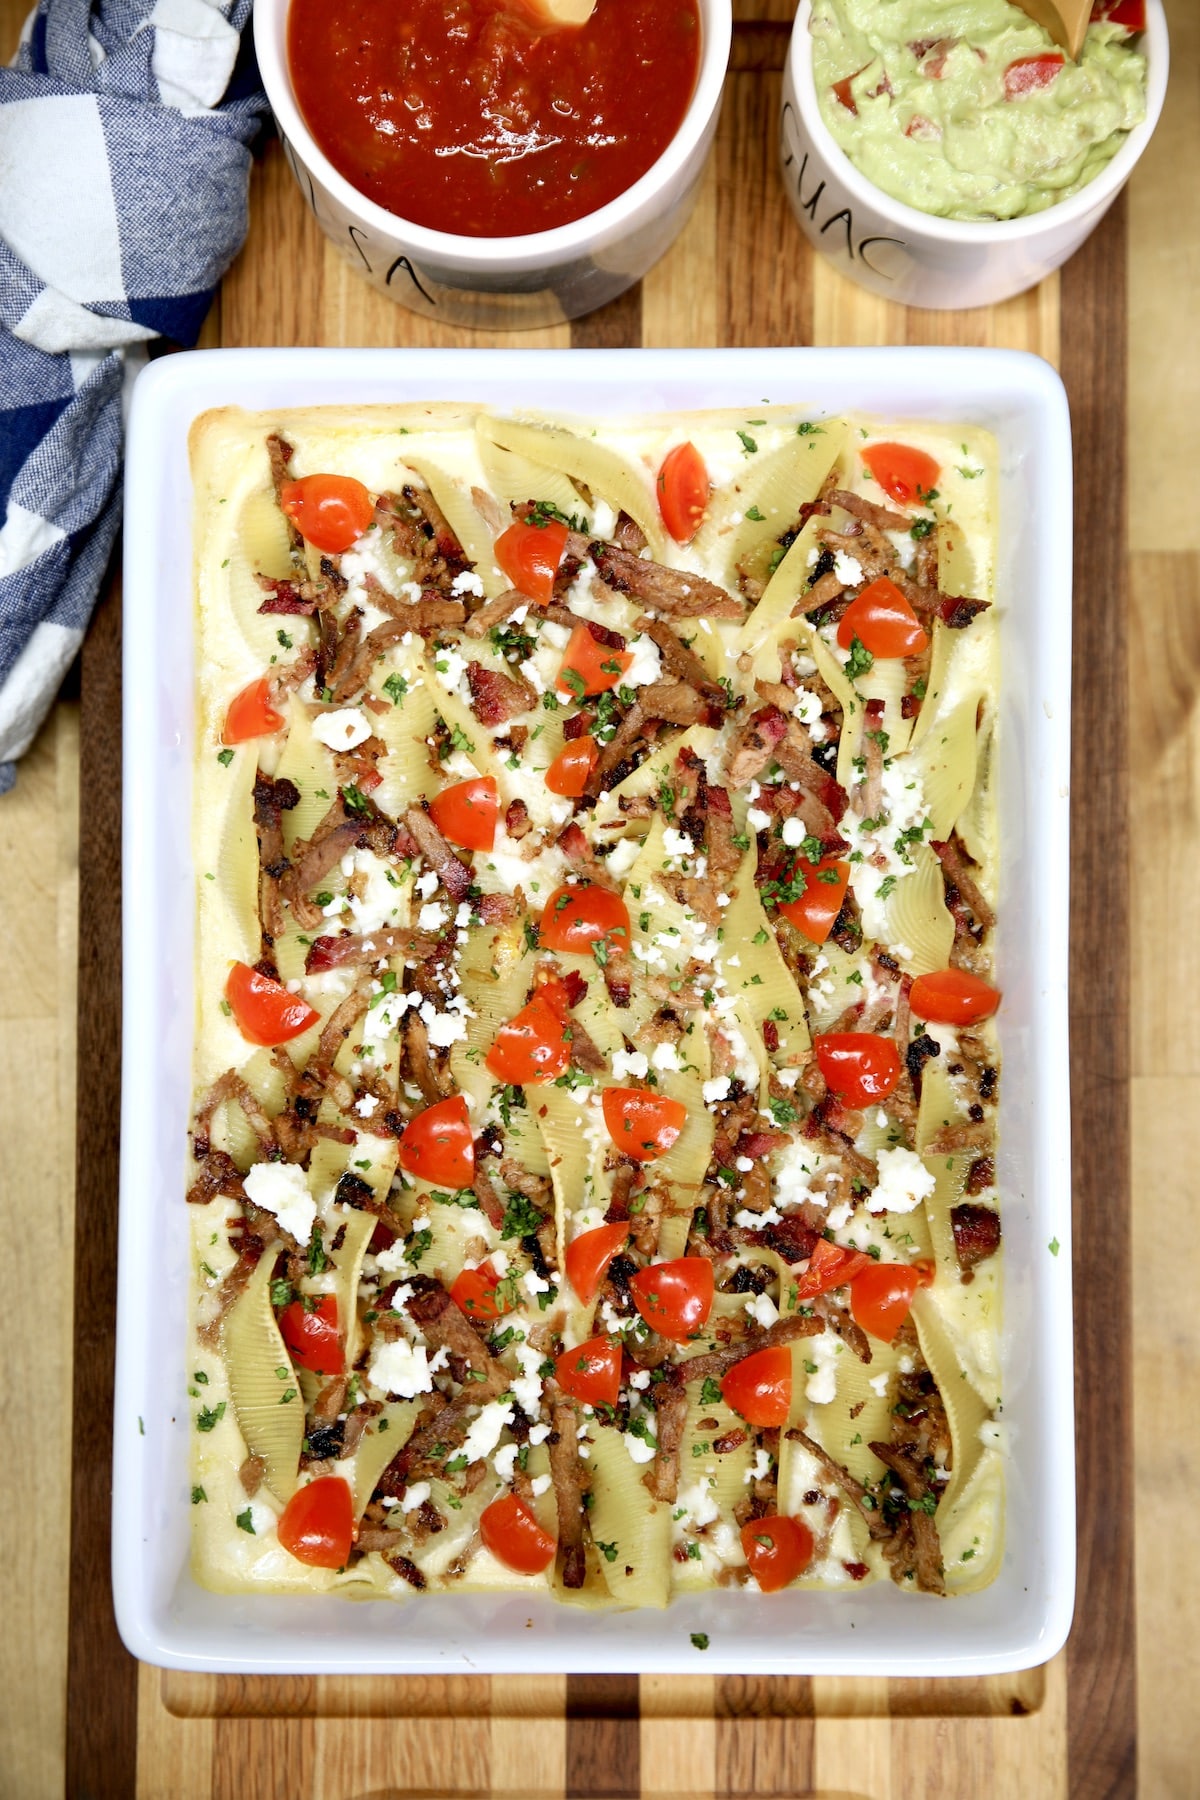 Casserole with brisket stuffed shells, topped with tomatoes, queso fresco cheese.